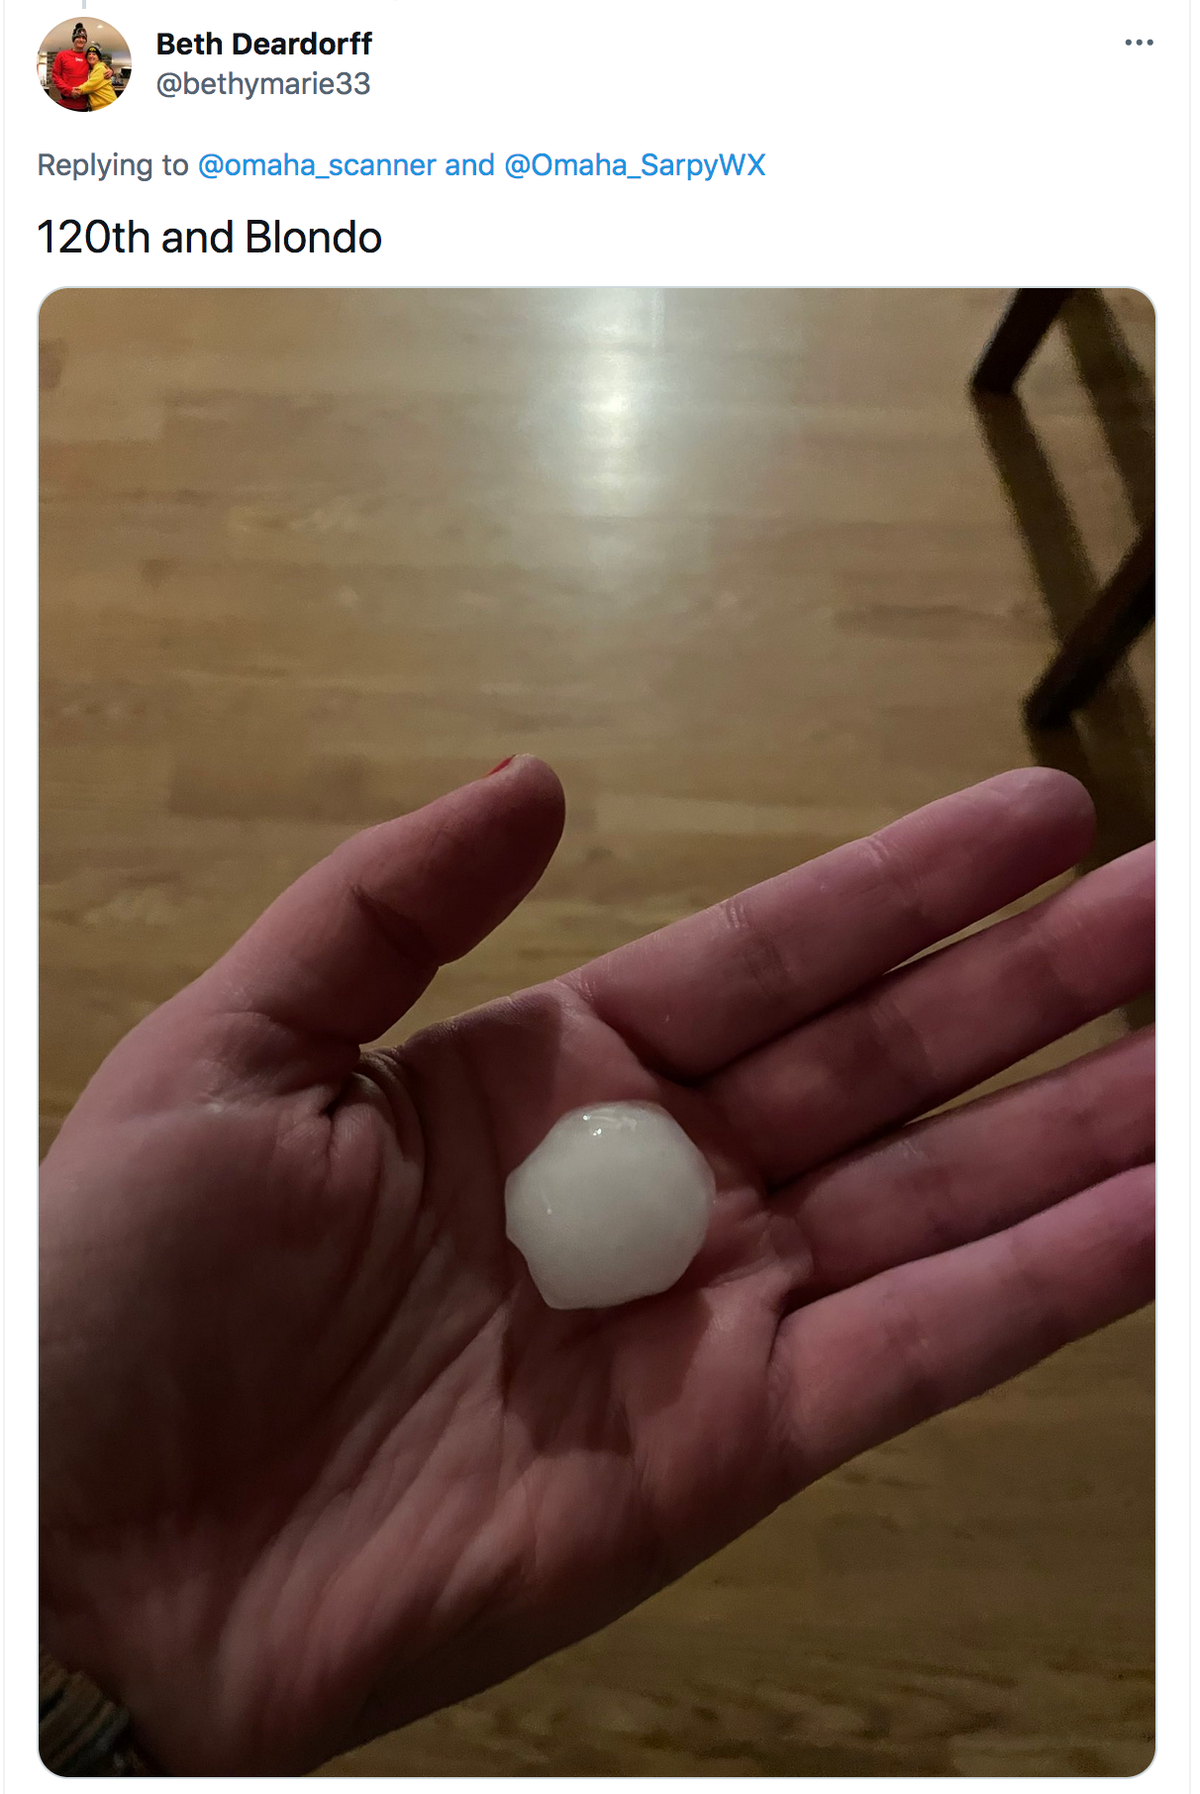 Flash floods and hail lash Omaha as power goes out for thousands